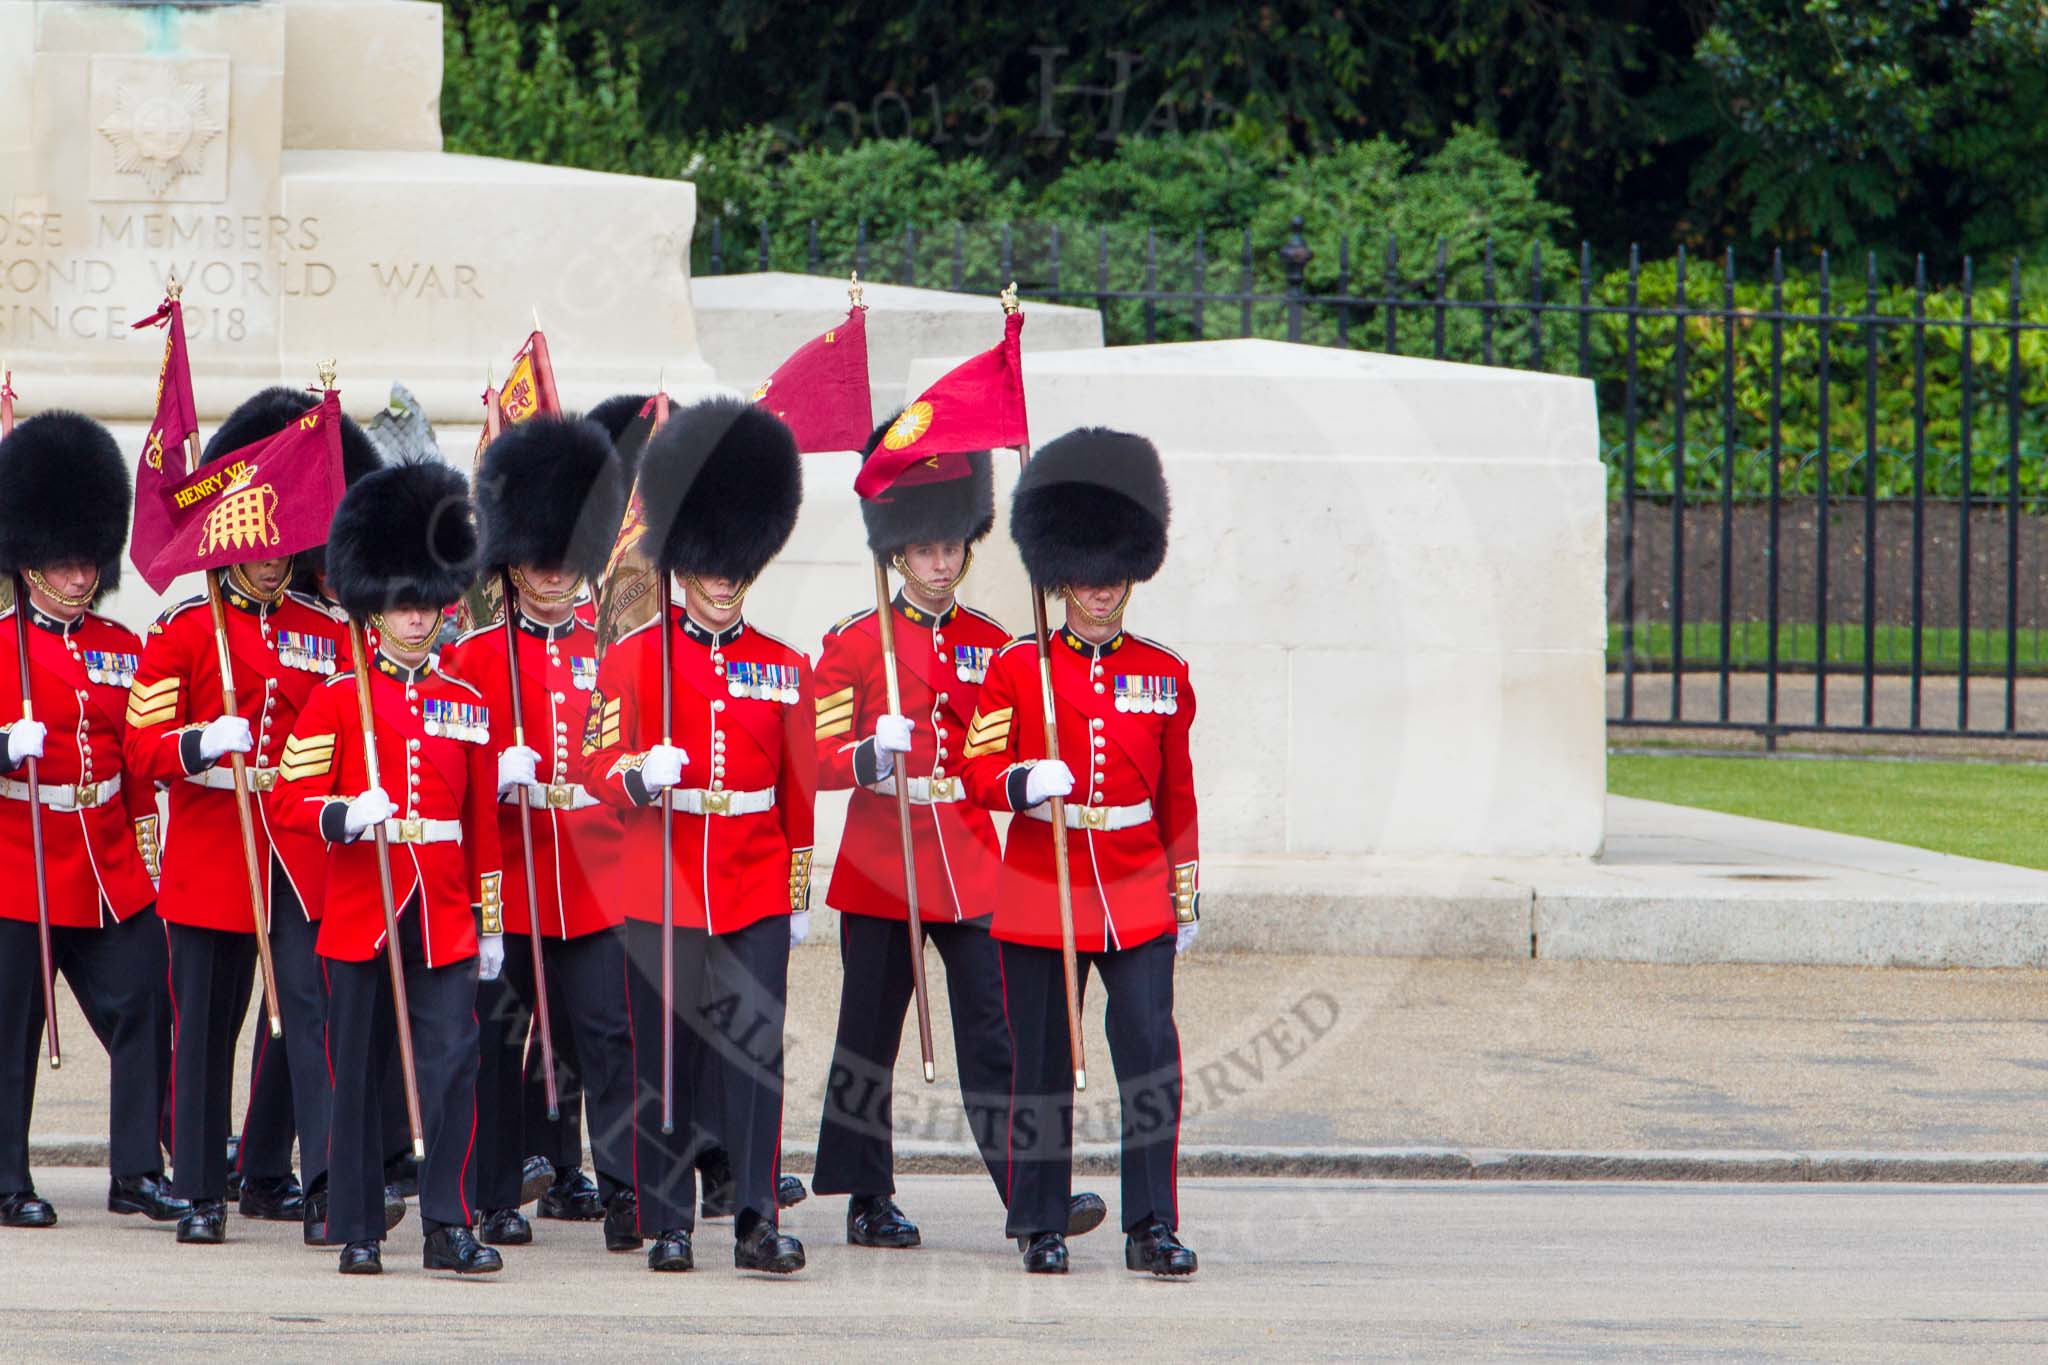 The Colonel's Review 2013: The 'Keepers of the Ground', guardsmen bearing marker flags for their respective regiments, turning towards Horse Guards Parade at the Guards Memorial..
Horse Guards Parade, Westminster,
London SW1,

United Kingdom,
on 08 June 2013 at 09:53, image #24